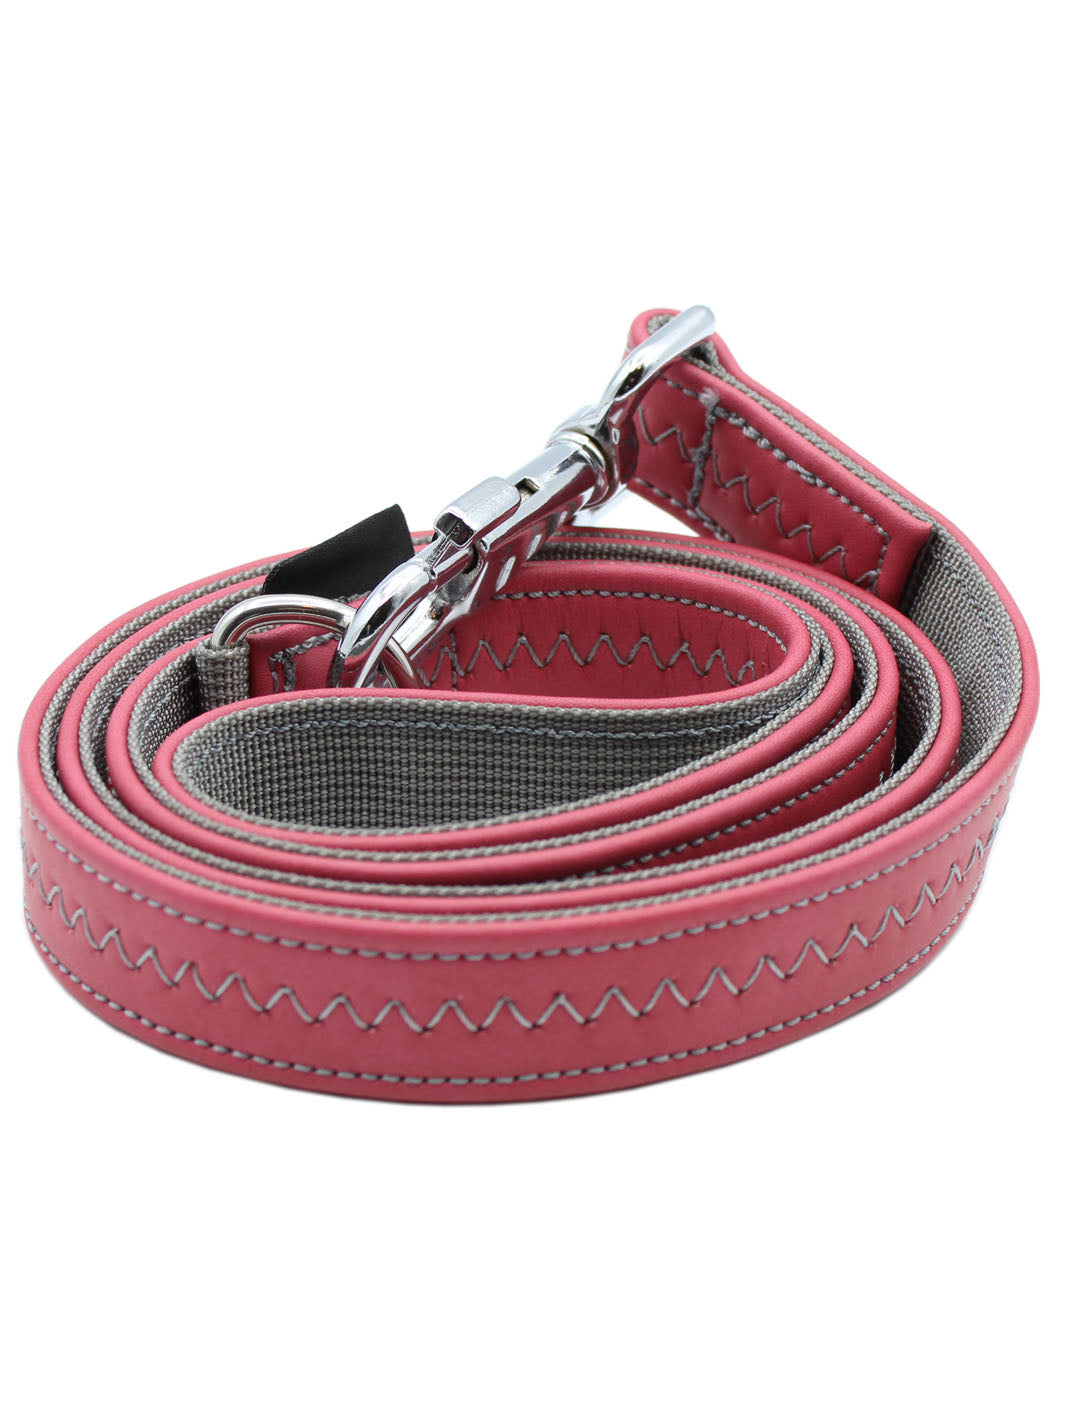 A MAGNUS Canis pink vegan leather leash with hand stitching.